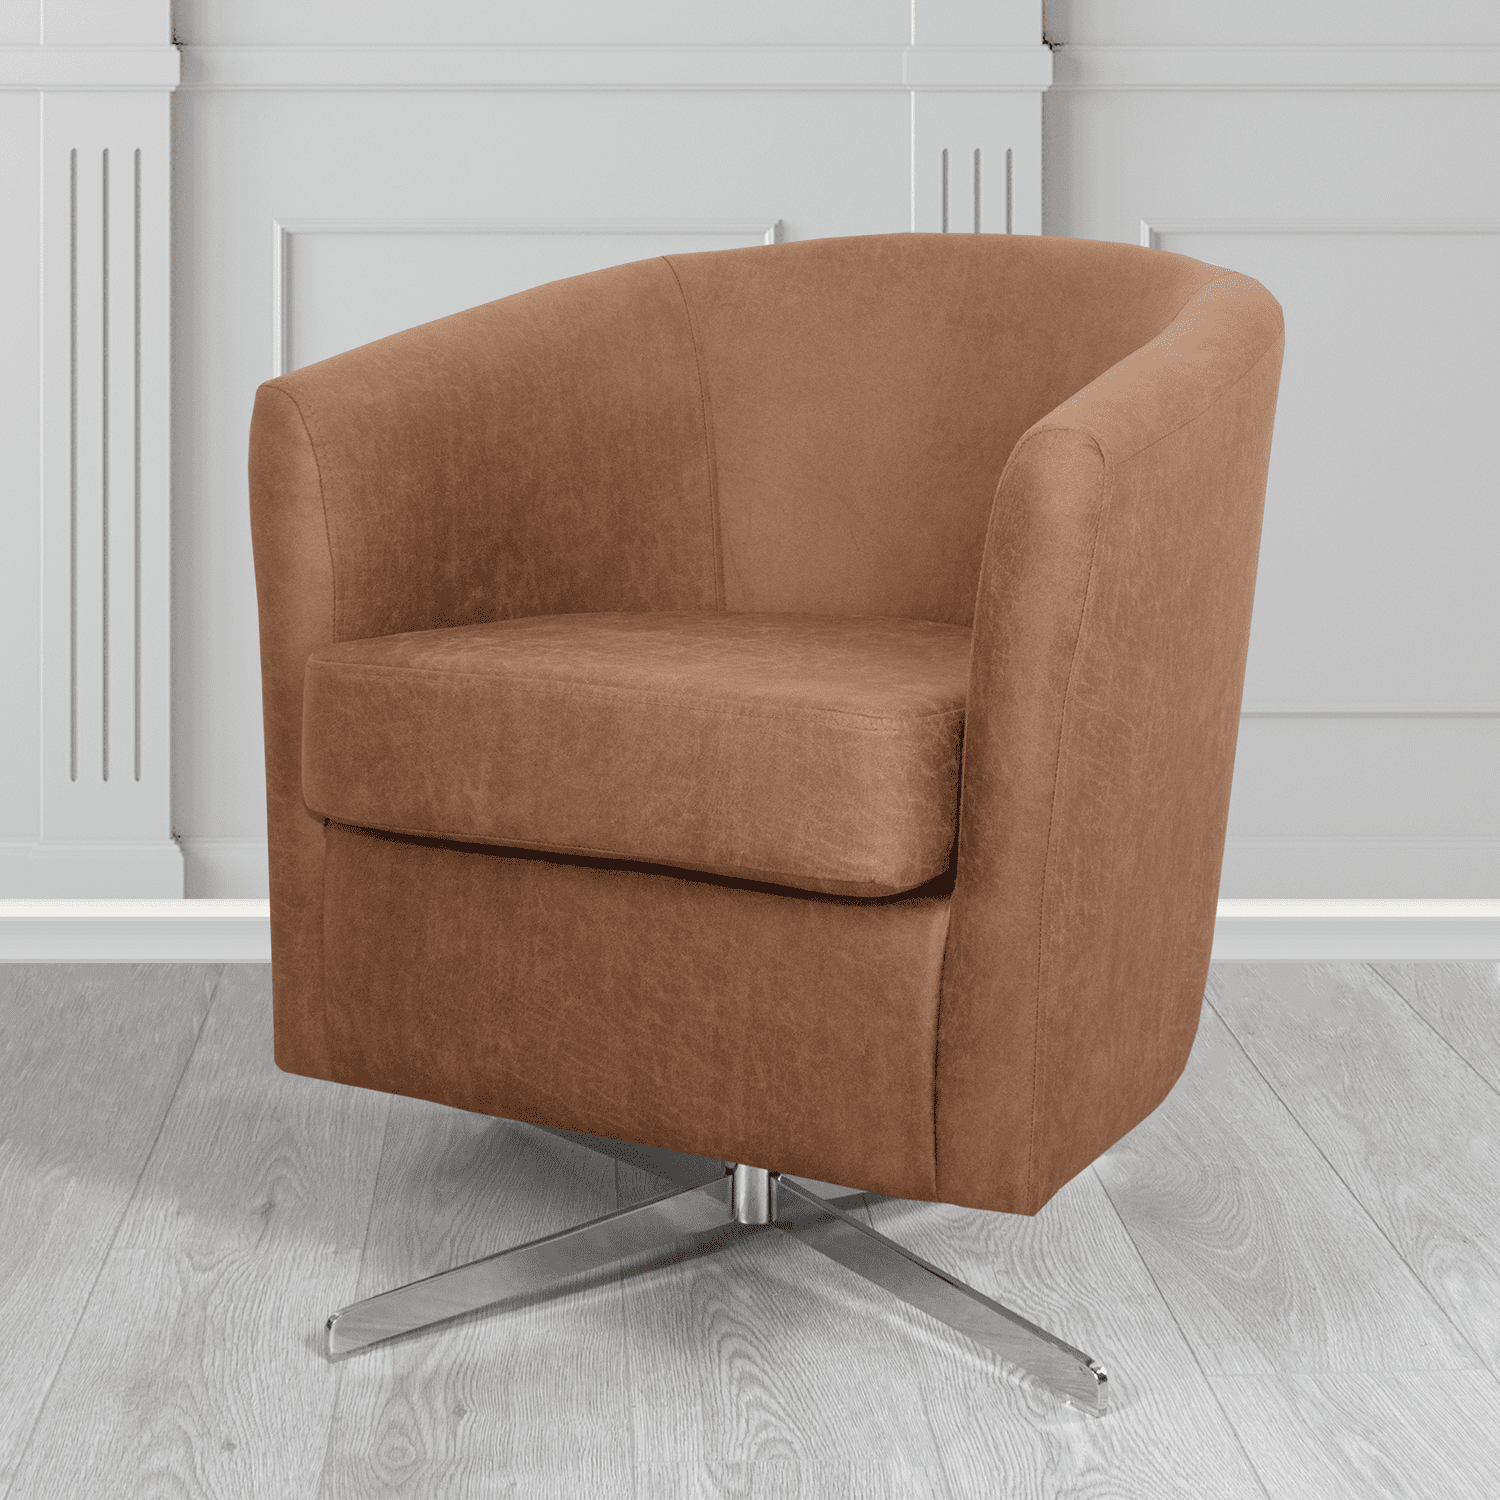 Cannes Swivel Tub Chair in Nevada Tan Faux Leather - The Tub Chair Shop